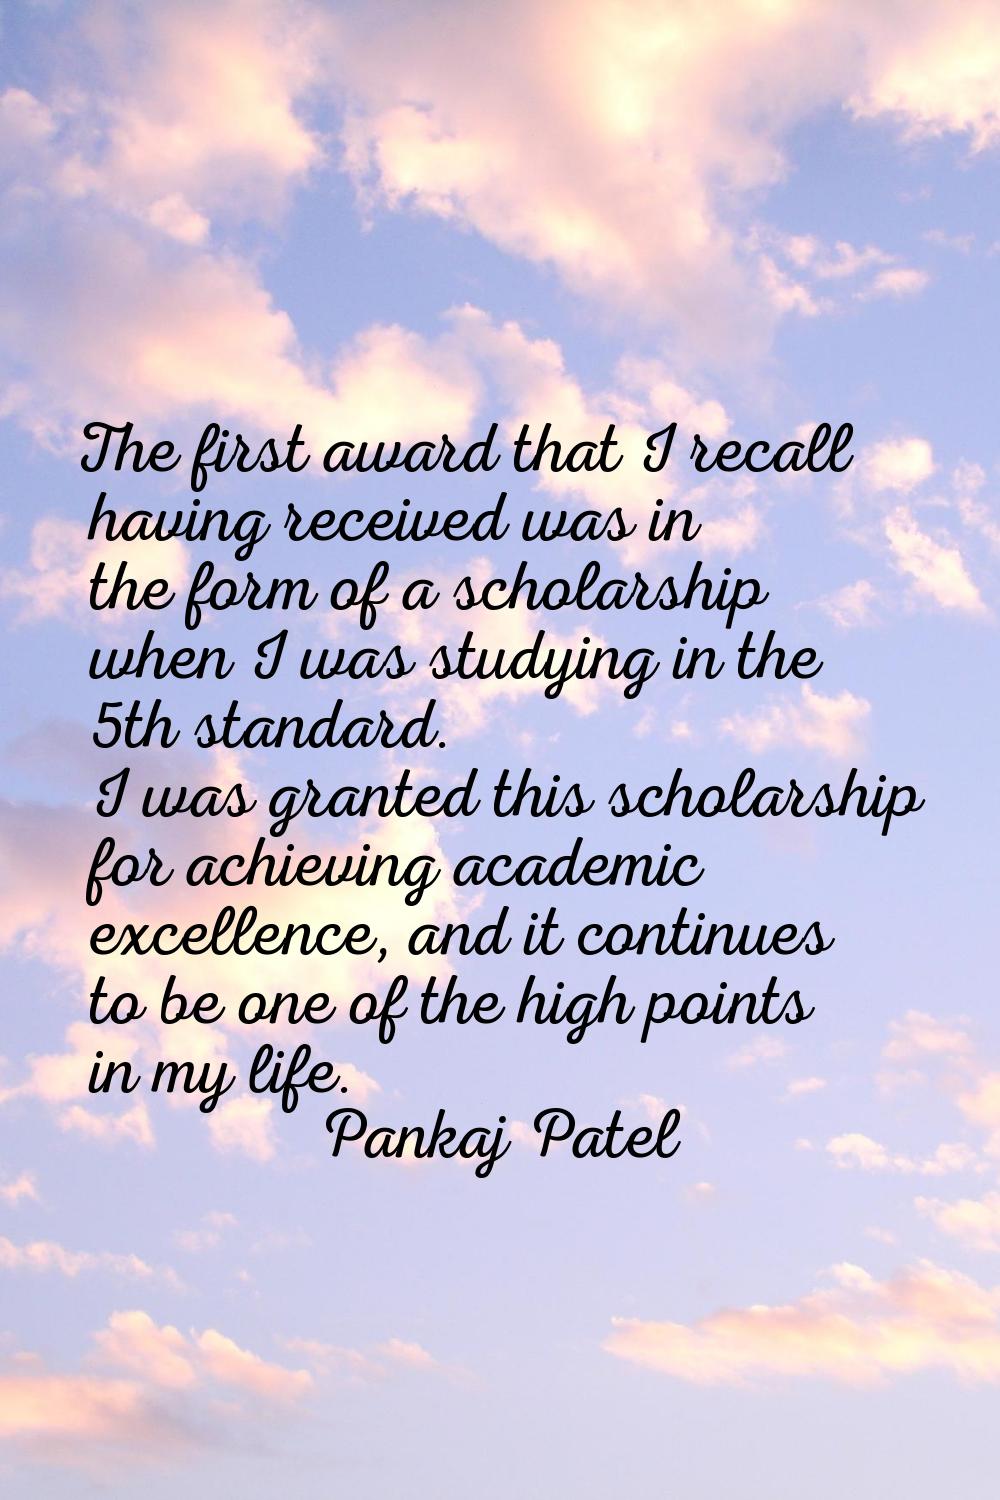 The first award that I recall having received was in the form of a scholarship when I was studying 